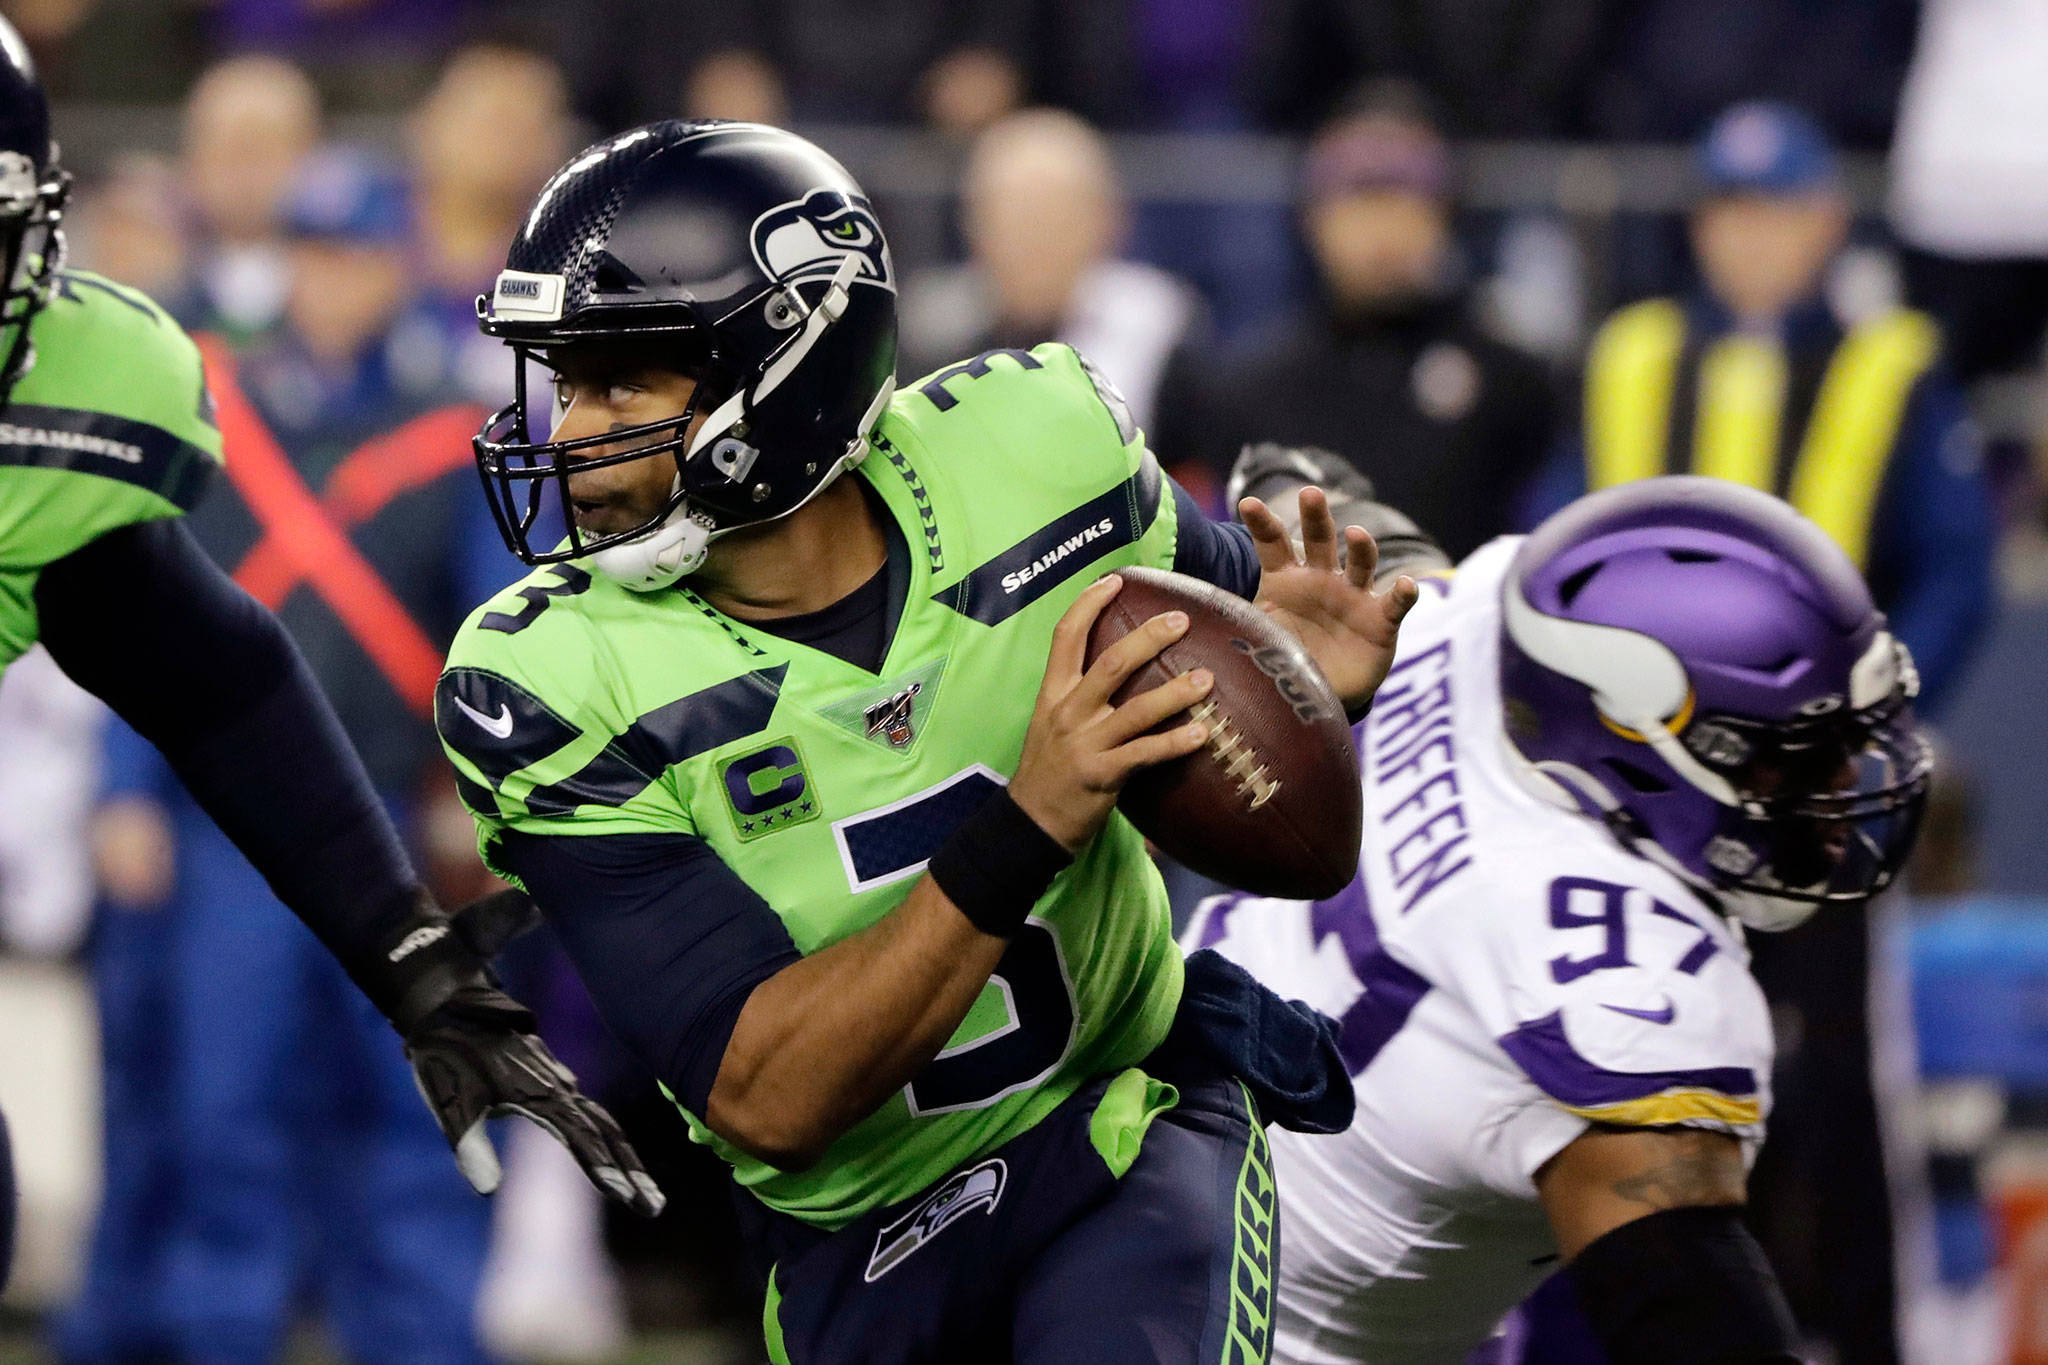 Seahawks quarterback Russell Wilson scrambles against the Vikings during the first half of a Monday Night Football game on Dec. 2, 2019, in Seattle. (AP Photo/Ted S. Warren)